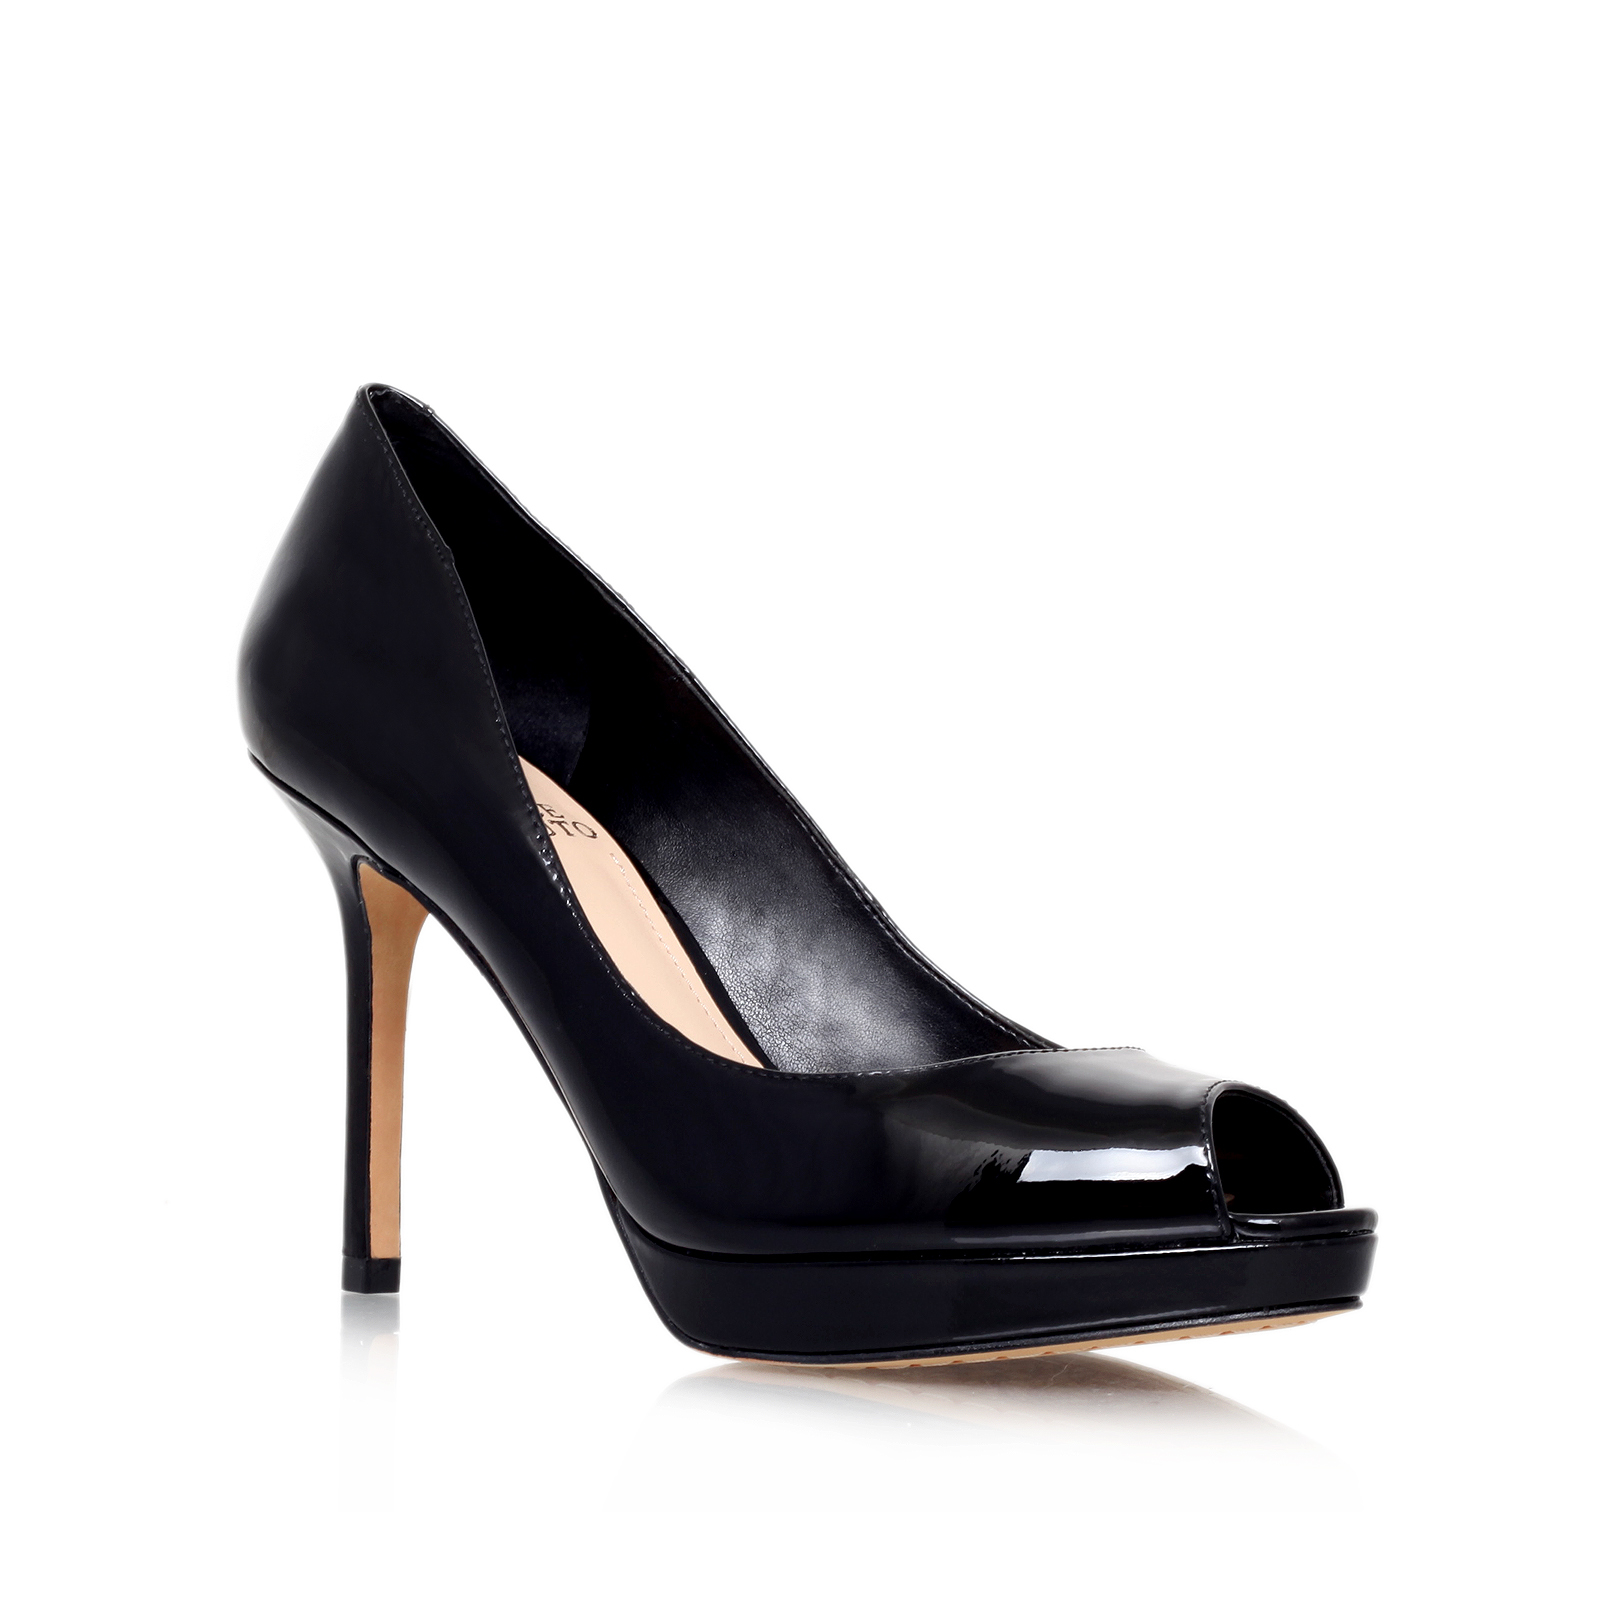 Vince Camuto | COPER Black Peep Toe High Heel Shoes by VINCE CAMUTO